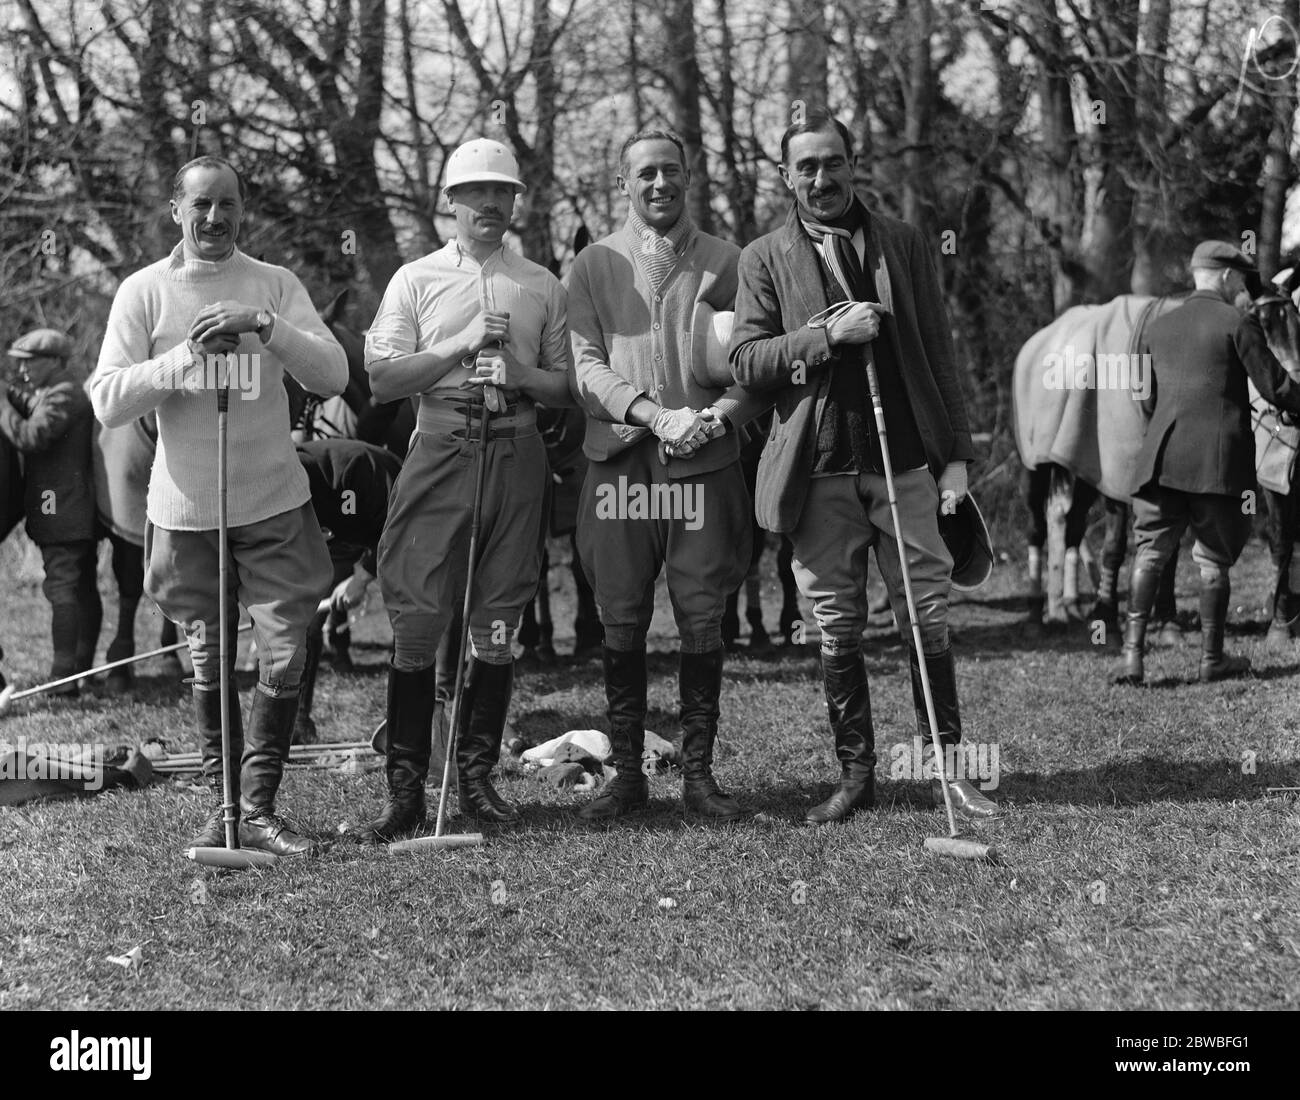 Polo at Tidworth . The English team practising for their upcoming matches at the Hurlingham Club . From left to right ; Colonel Tomkinson , Lord Dalmeny , Lord Wodehouse and Major Lockett . 1921 Stock Photo